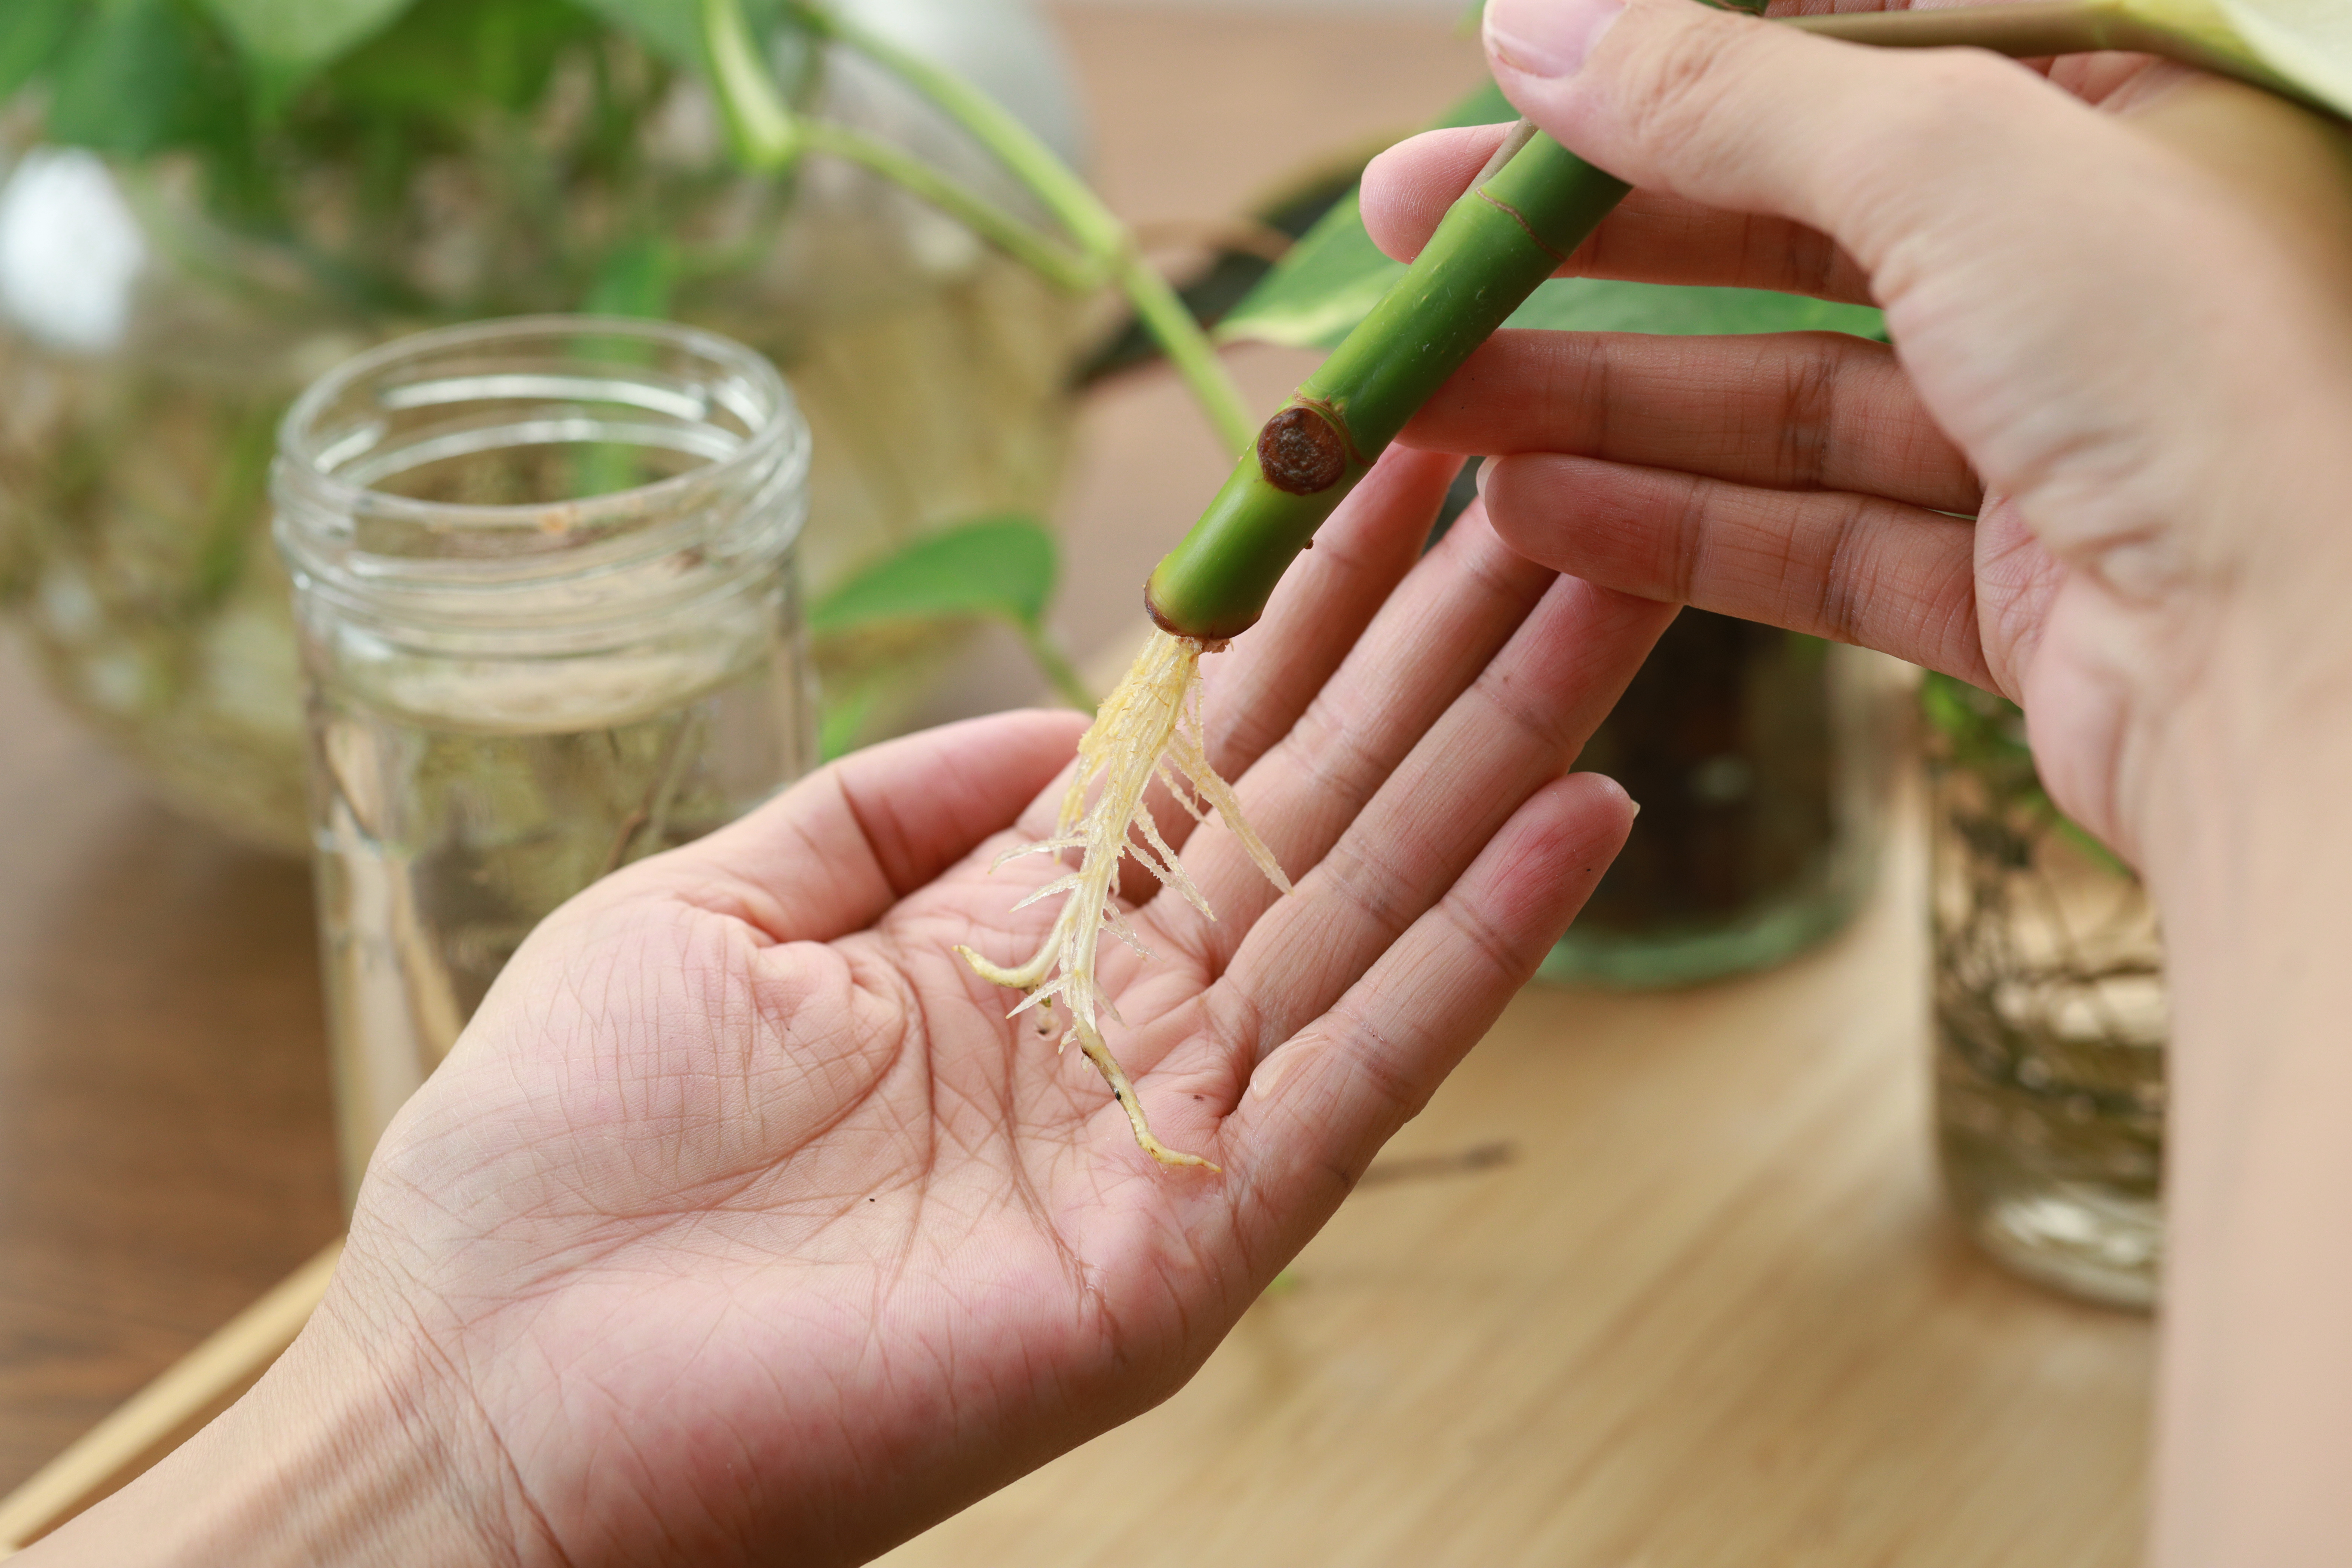 Person holding a plant cutting